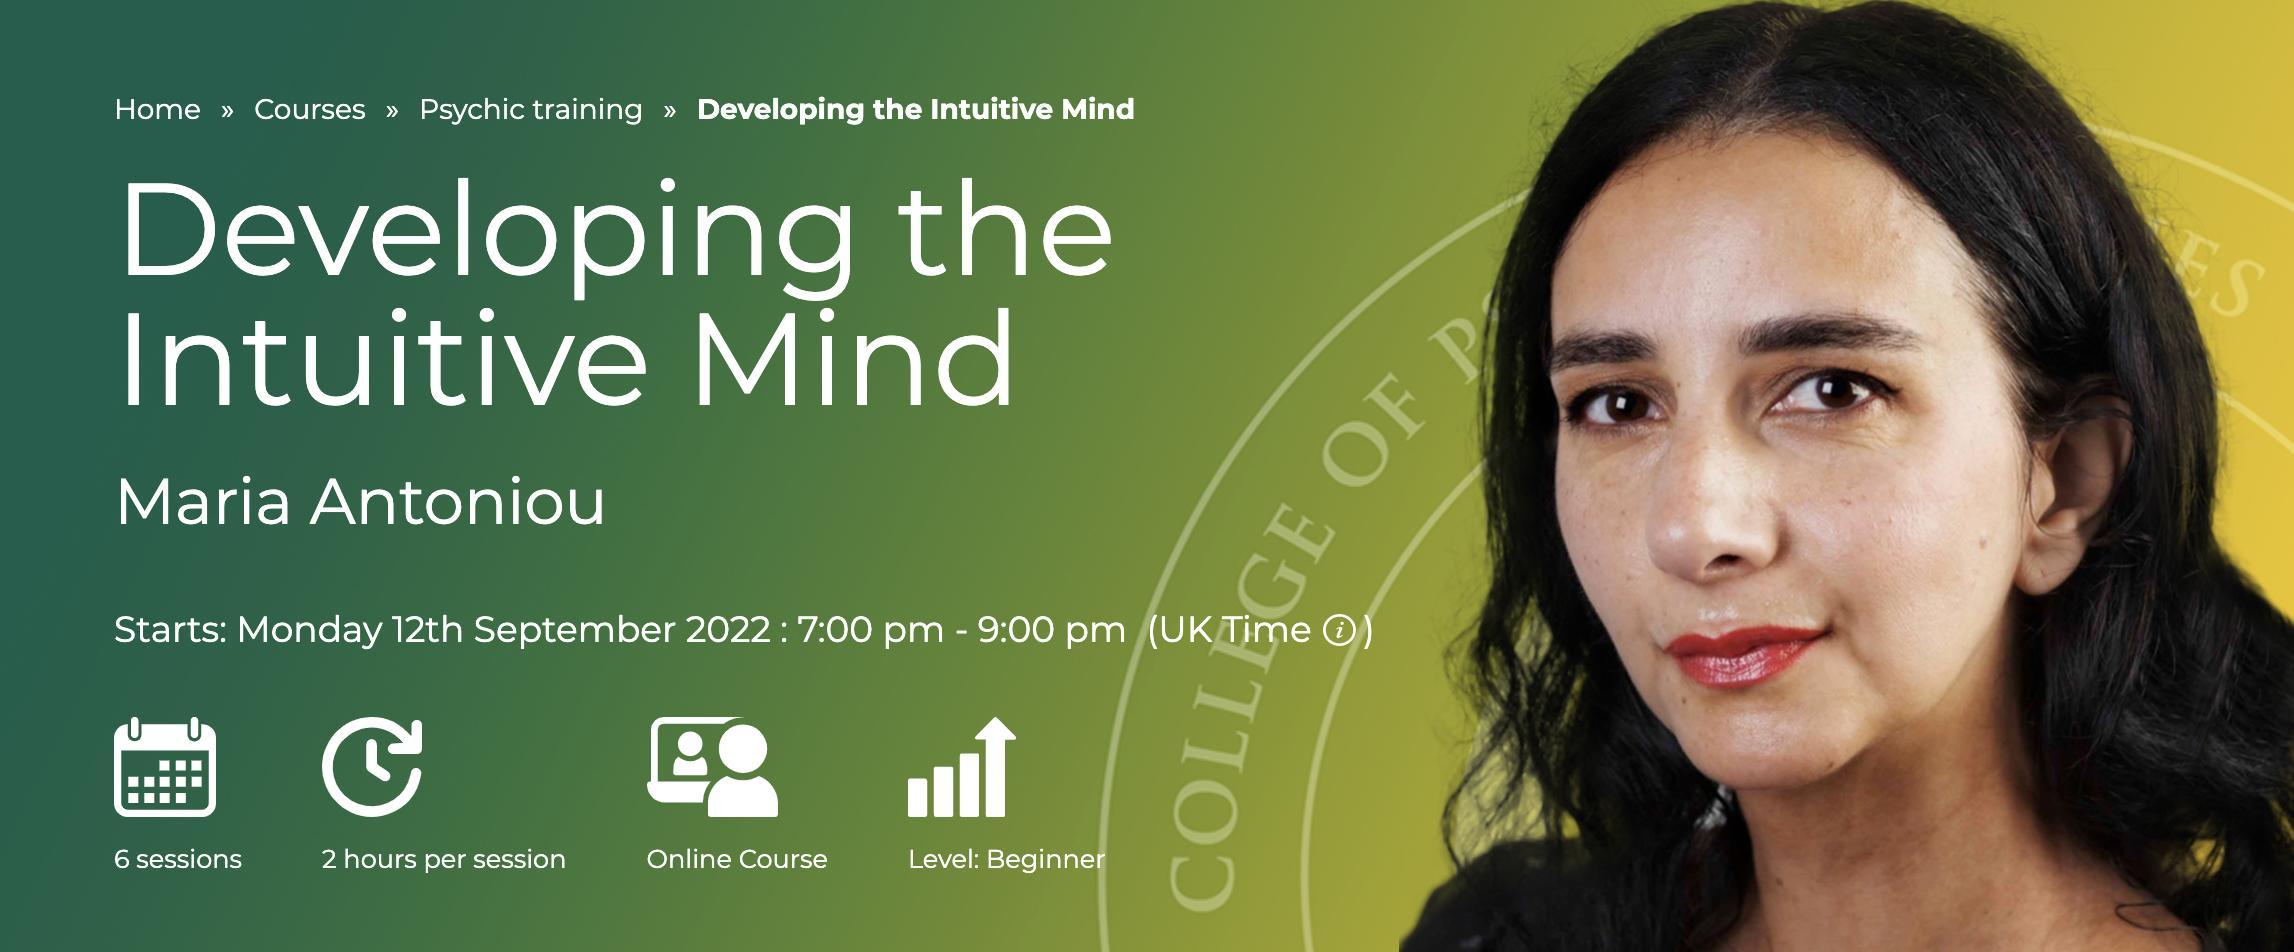 Developing the Intuitive Mind 6-week psychic training course